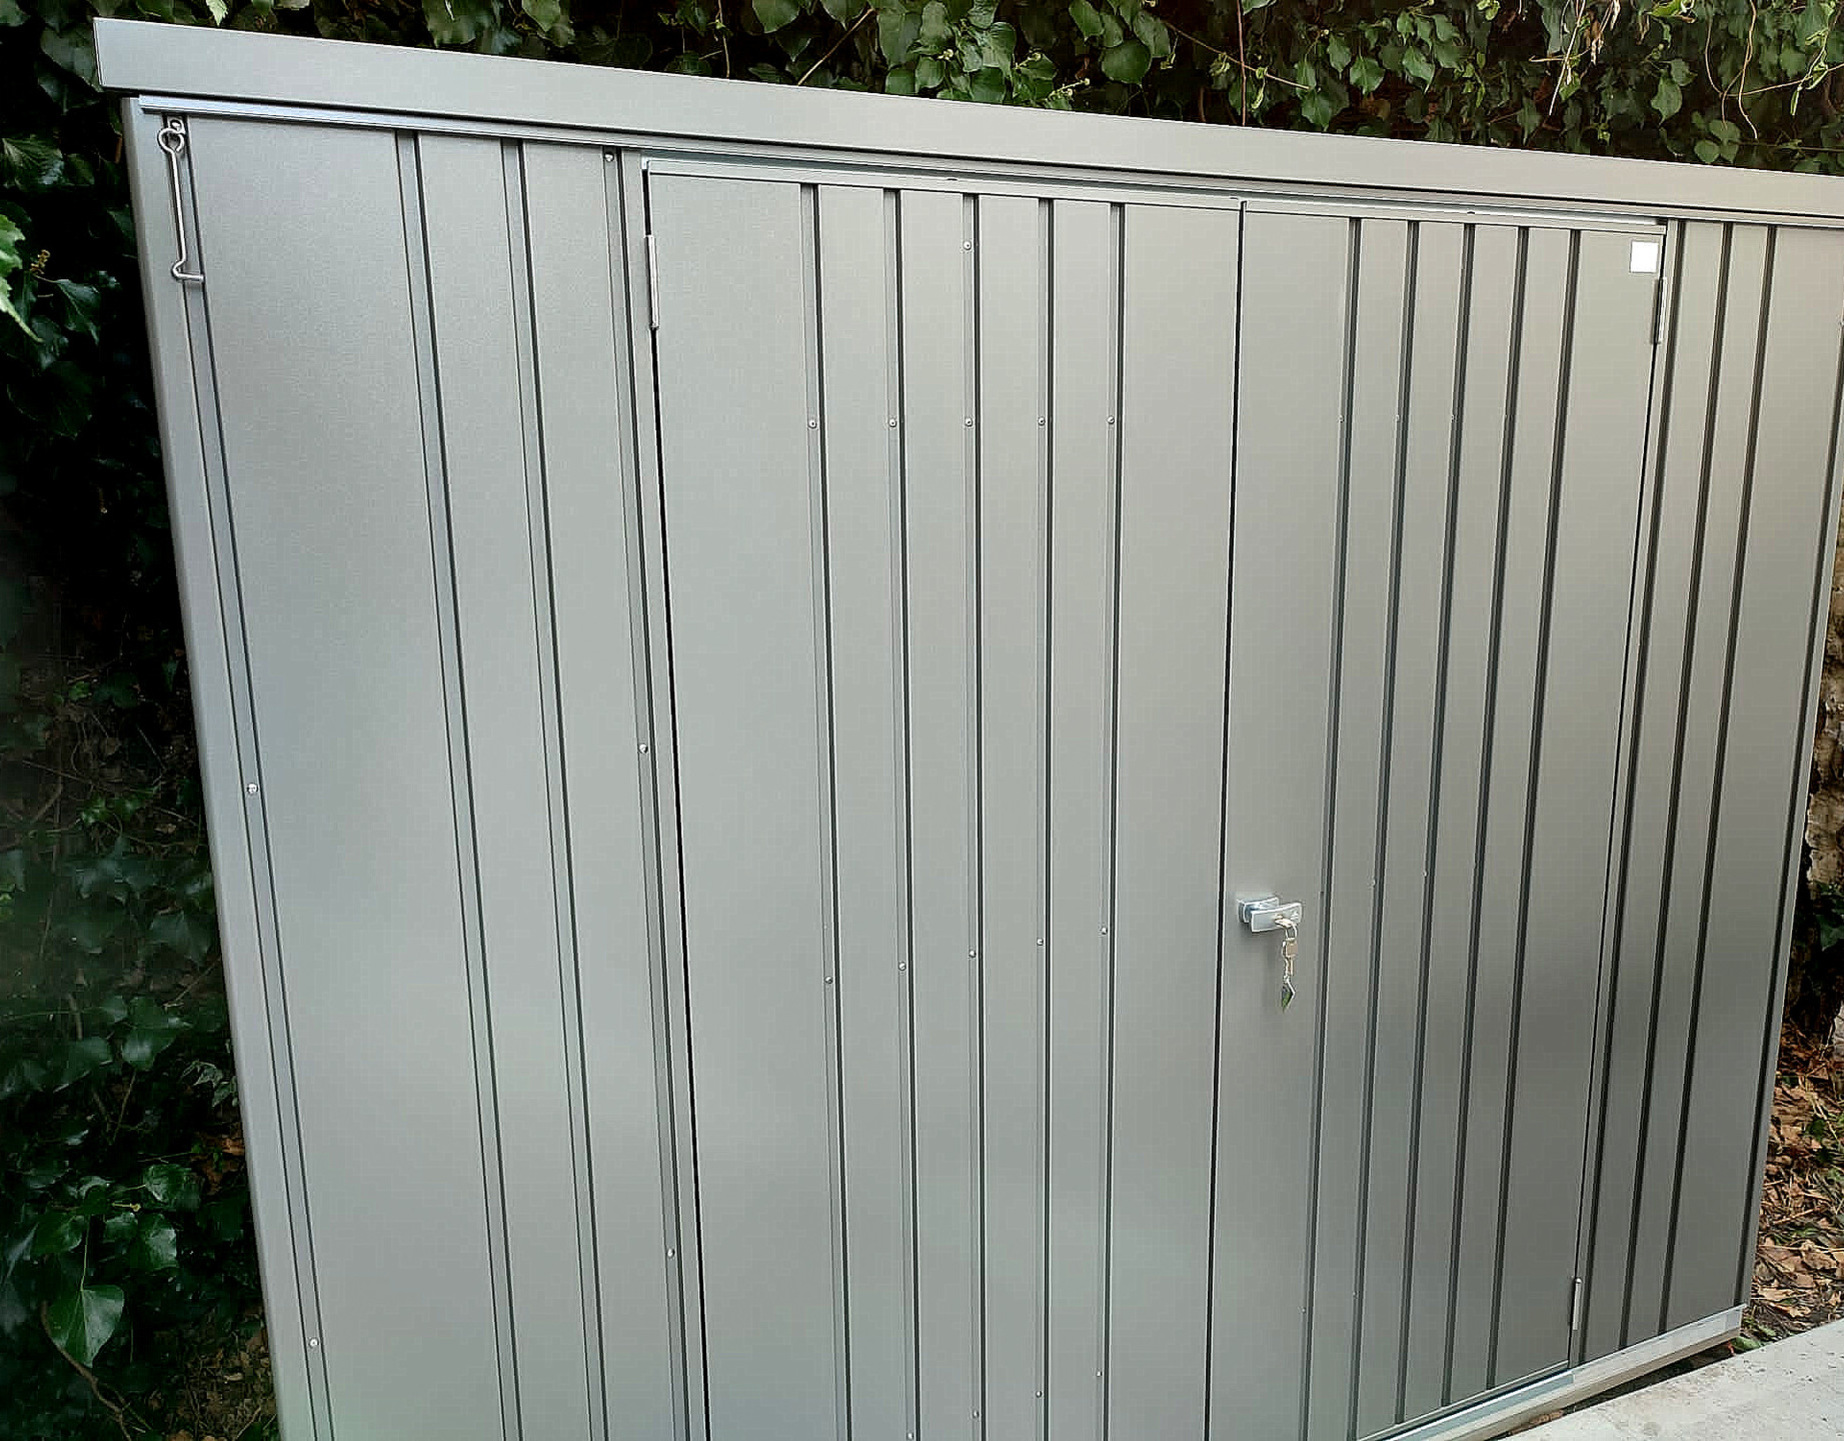 Biohort Equipment Locker Size 230 in metallic quartz grey, supplied & fitted in Maynooth, Co Kildare  | Owen Chubb Ireland's Leading supplier of Biohort Garden Sheds & Storage Solutions | Supplied + Fitted Nationwide